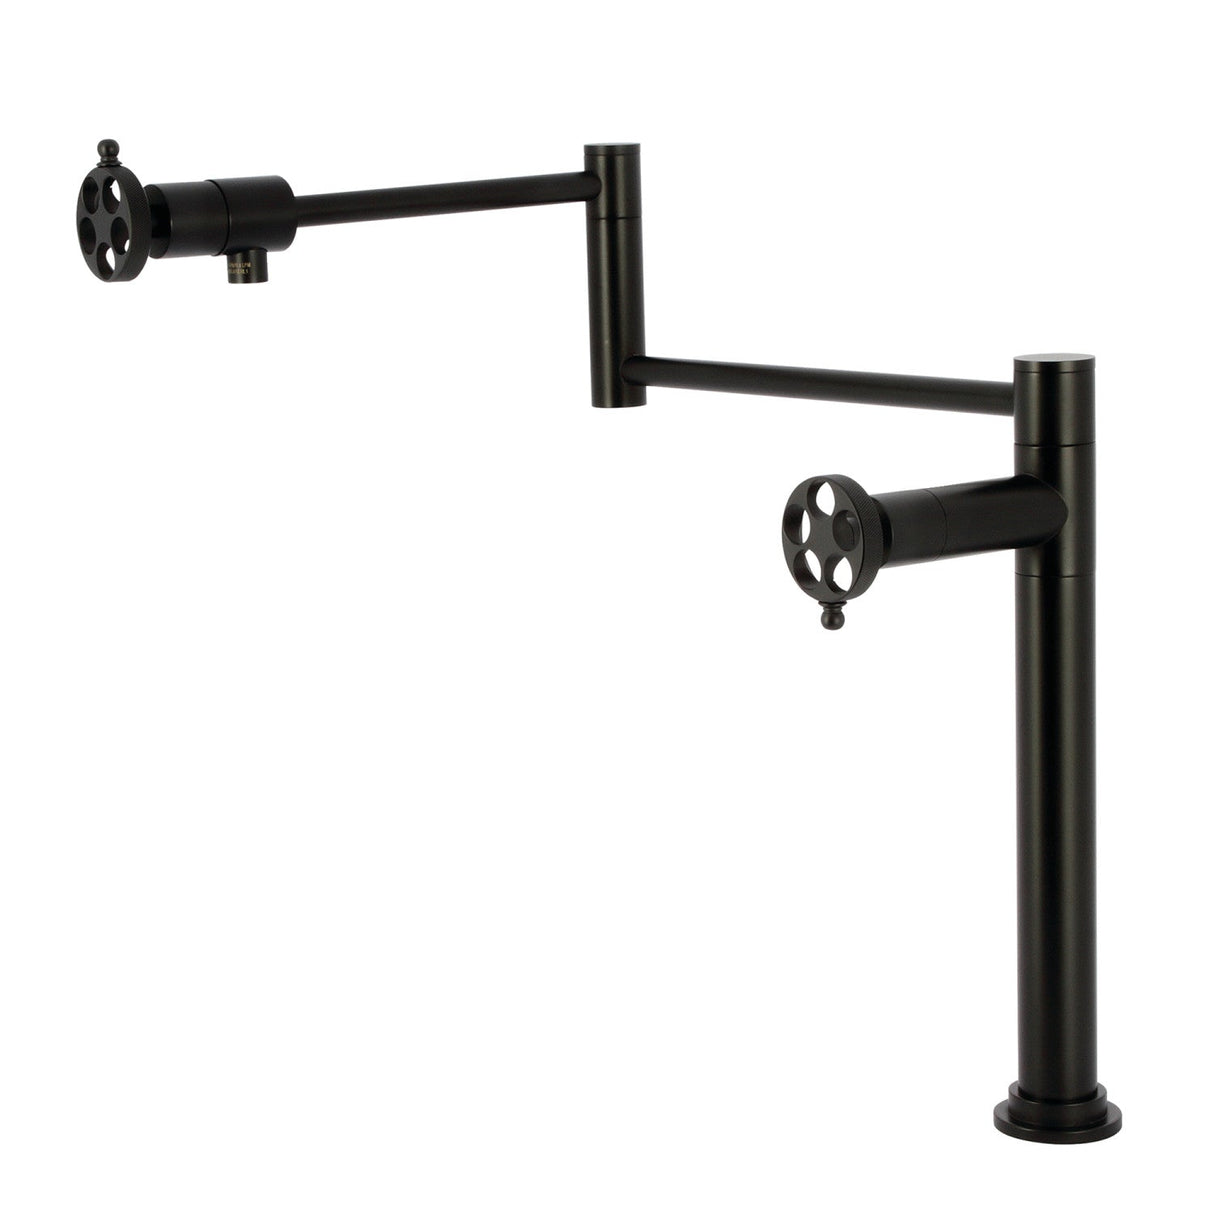 Wendell KS4700RKZ Two-Handle 1-Hole Deck Mount Pot Filler Faucet with Knurled Handle, Matte Black